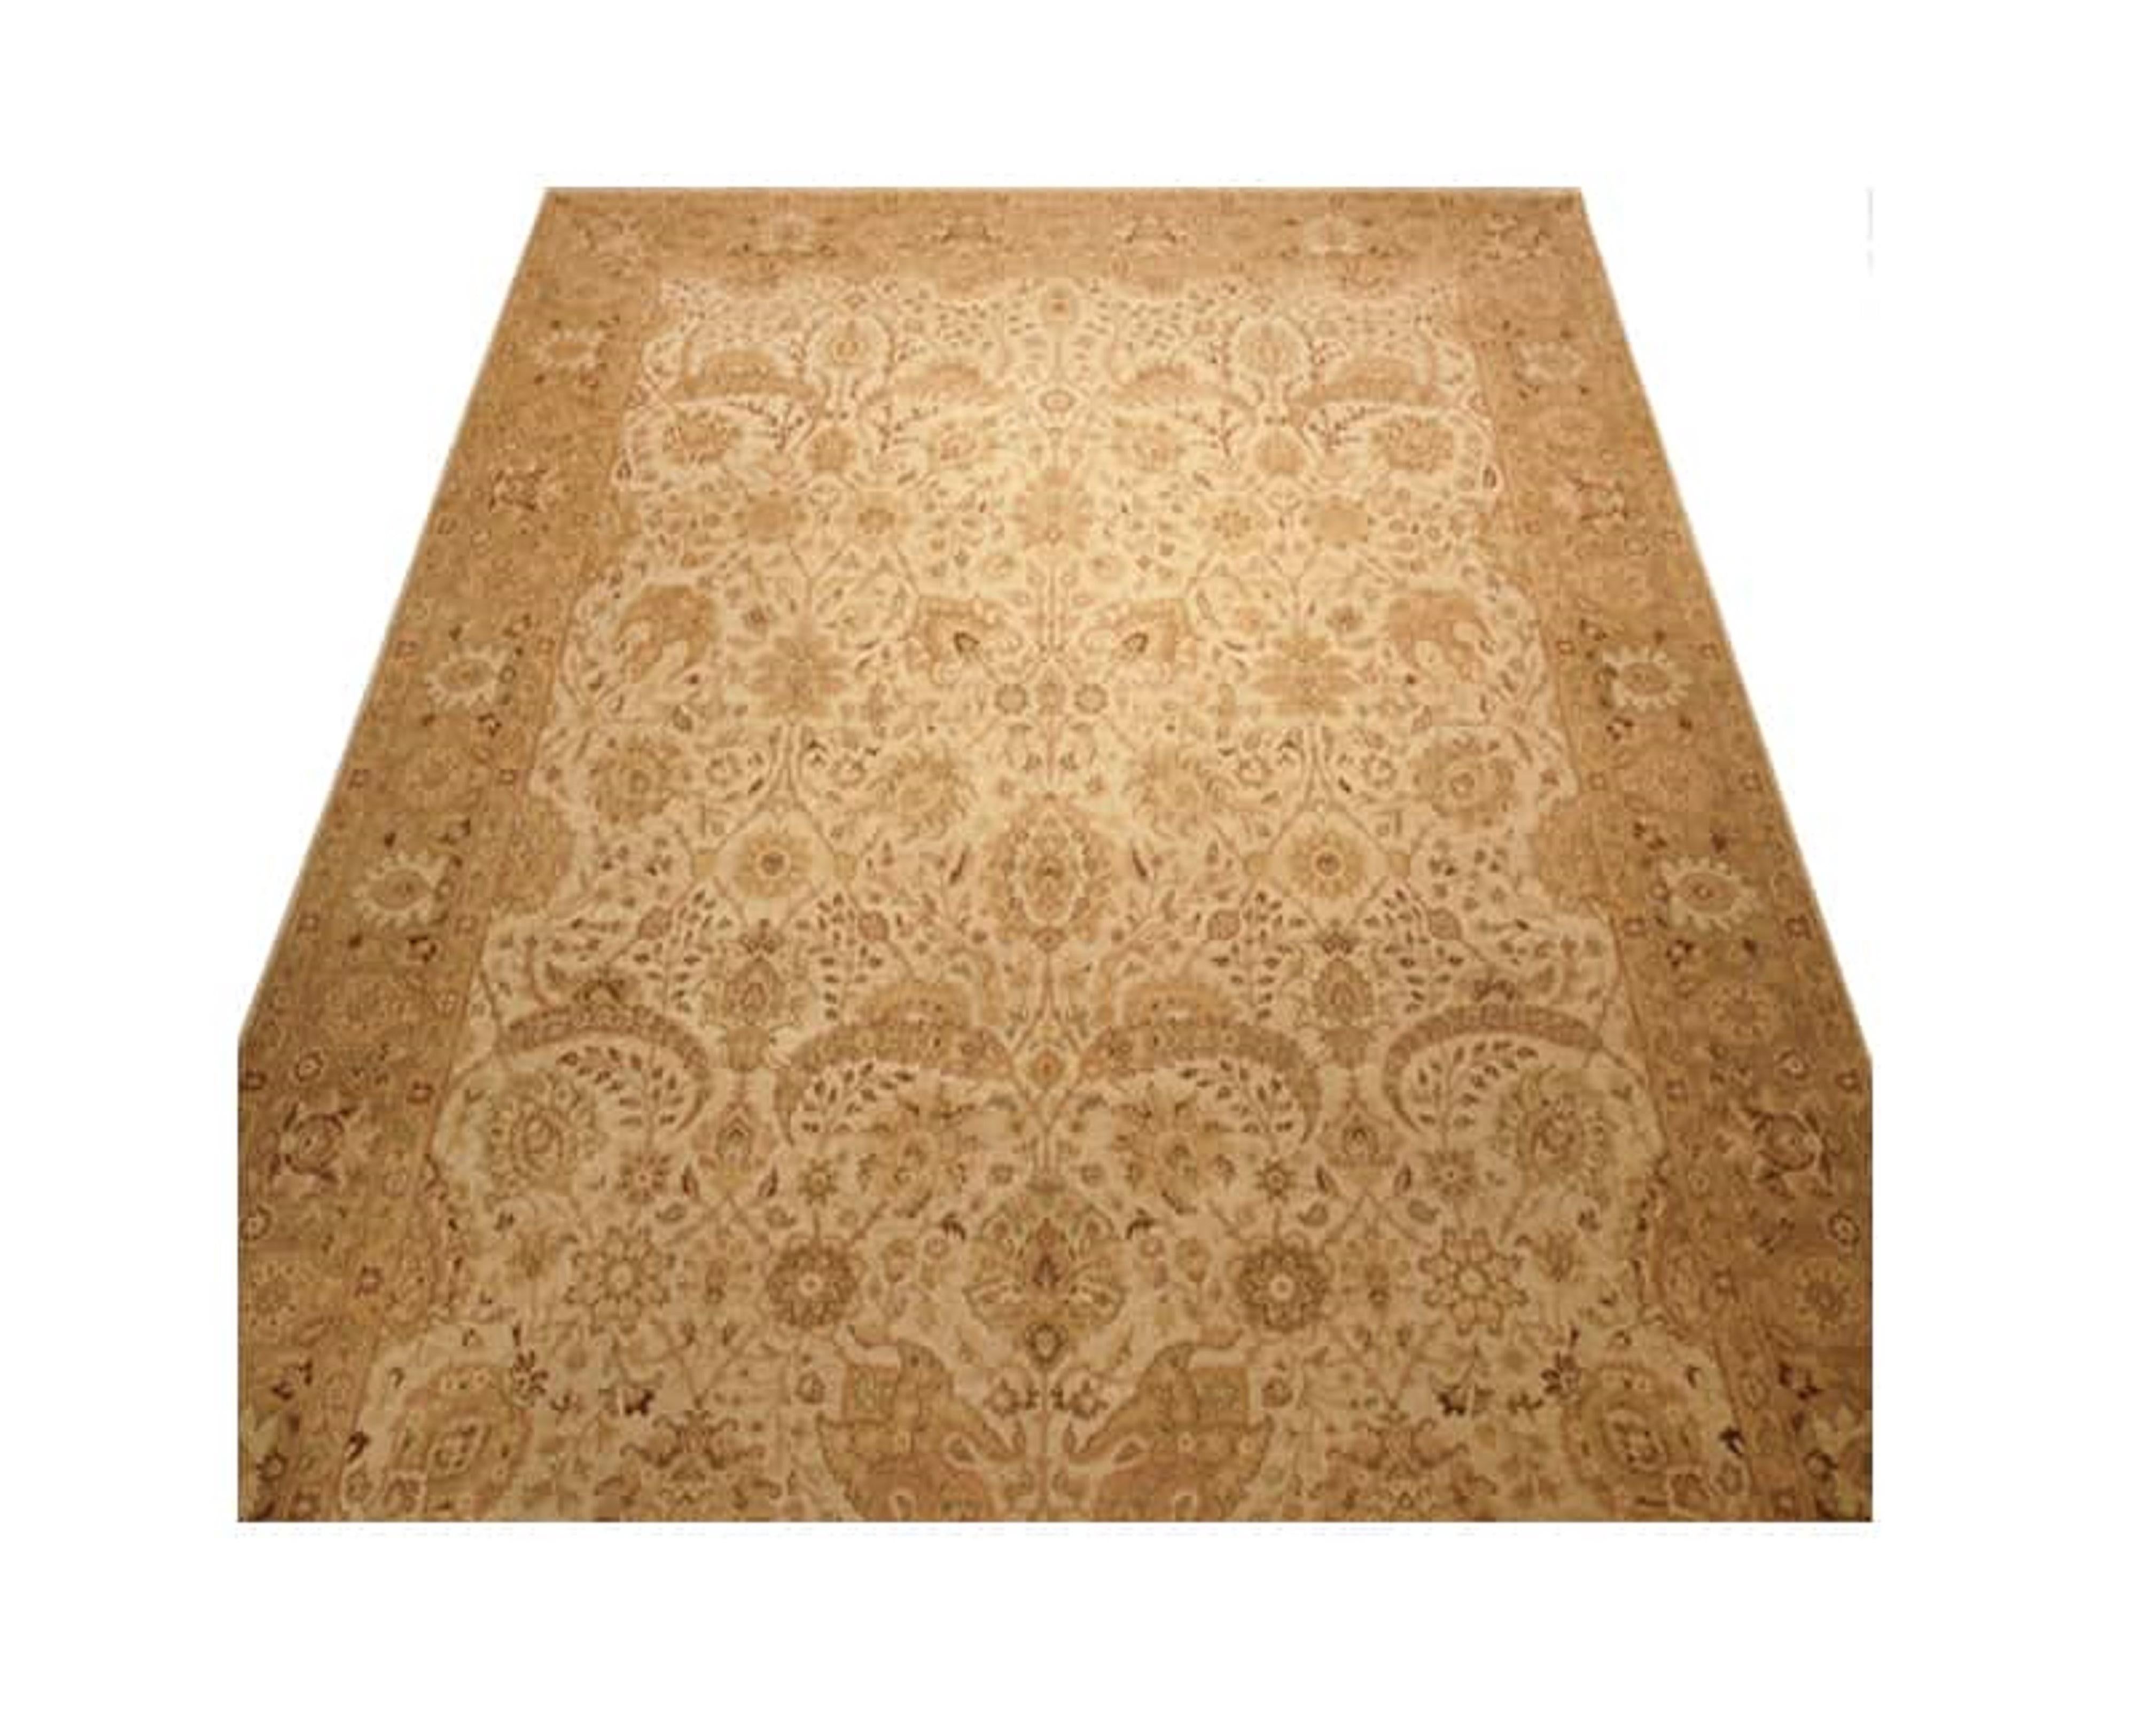 Traditional handwoven Indian Agra rug recreation – Traditional handwoven Indian Agra rug featuring an elegant all-over floral design rendered in a plush field of ivory surrounded by a beige-colored border featuring a nuanced botanical theme.